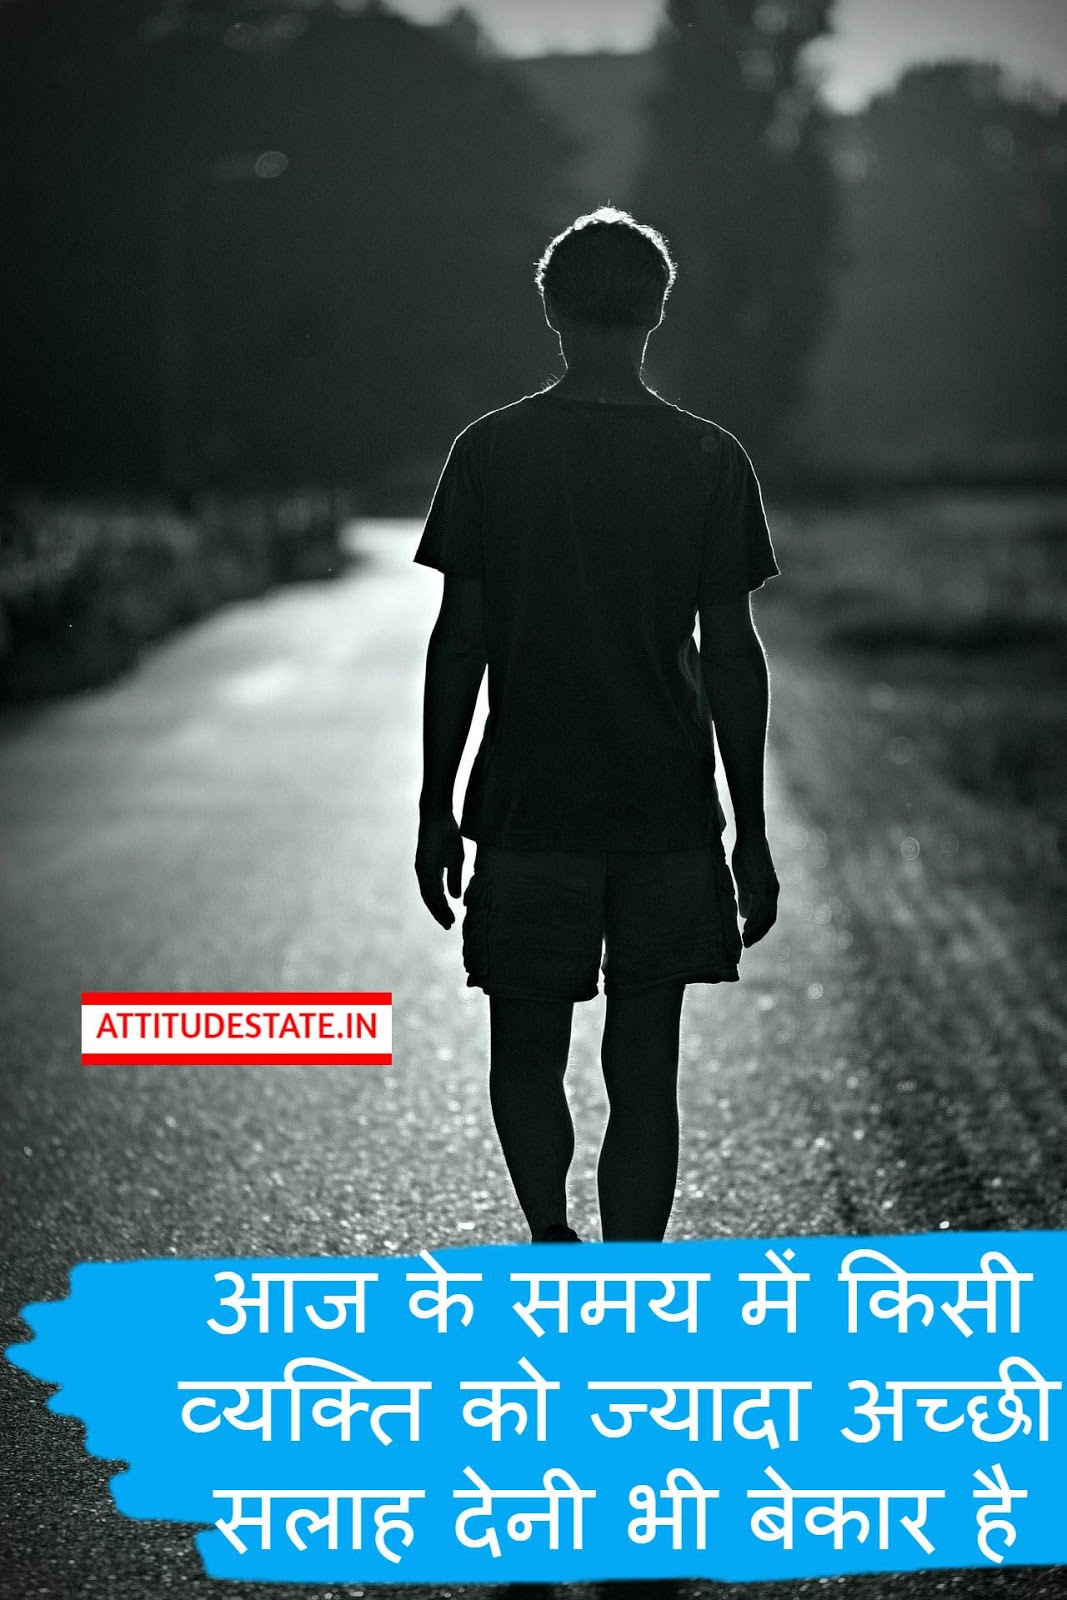 ATTITUDE - Whatsapp Status Images in Hindi About Life ...